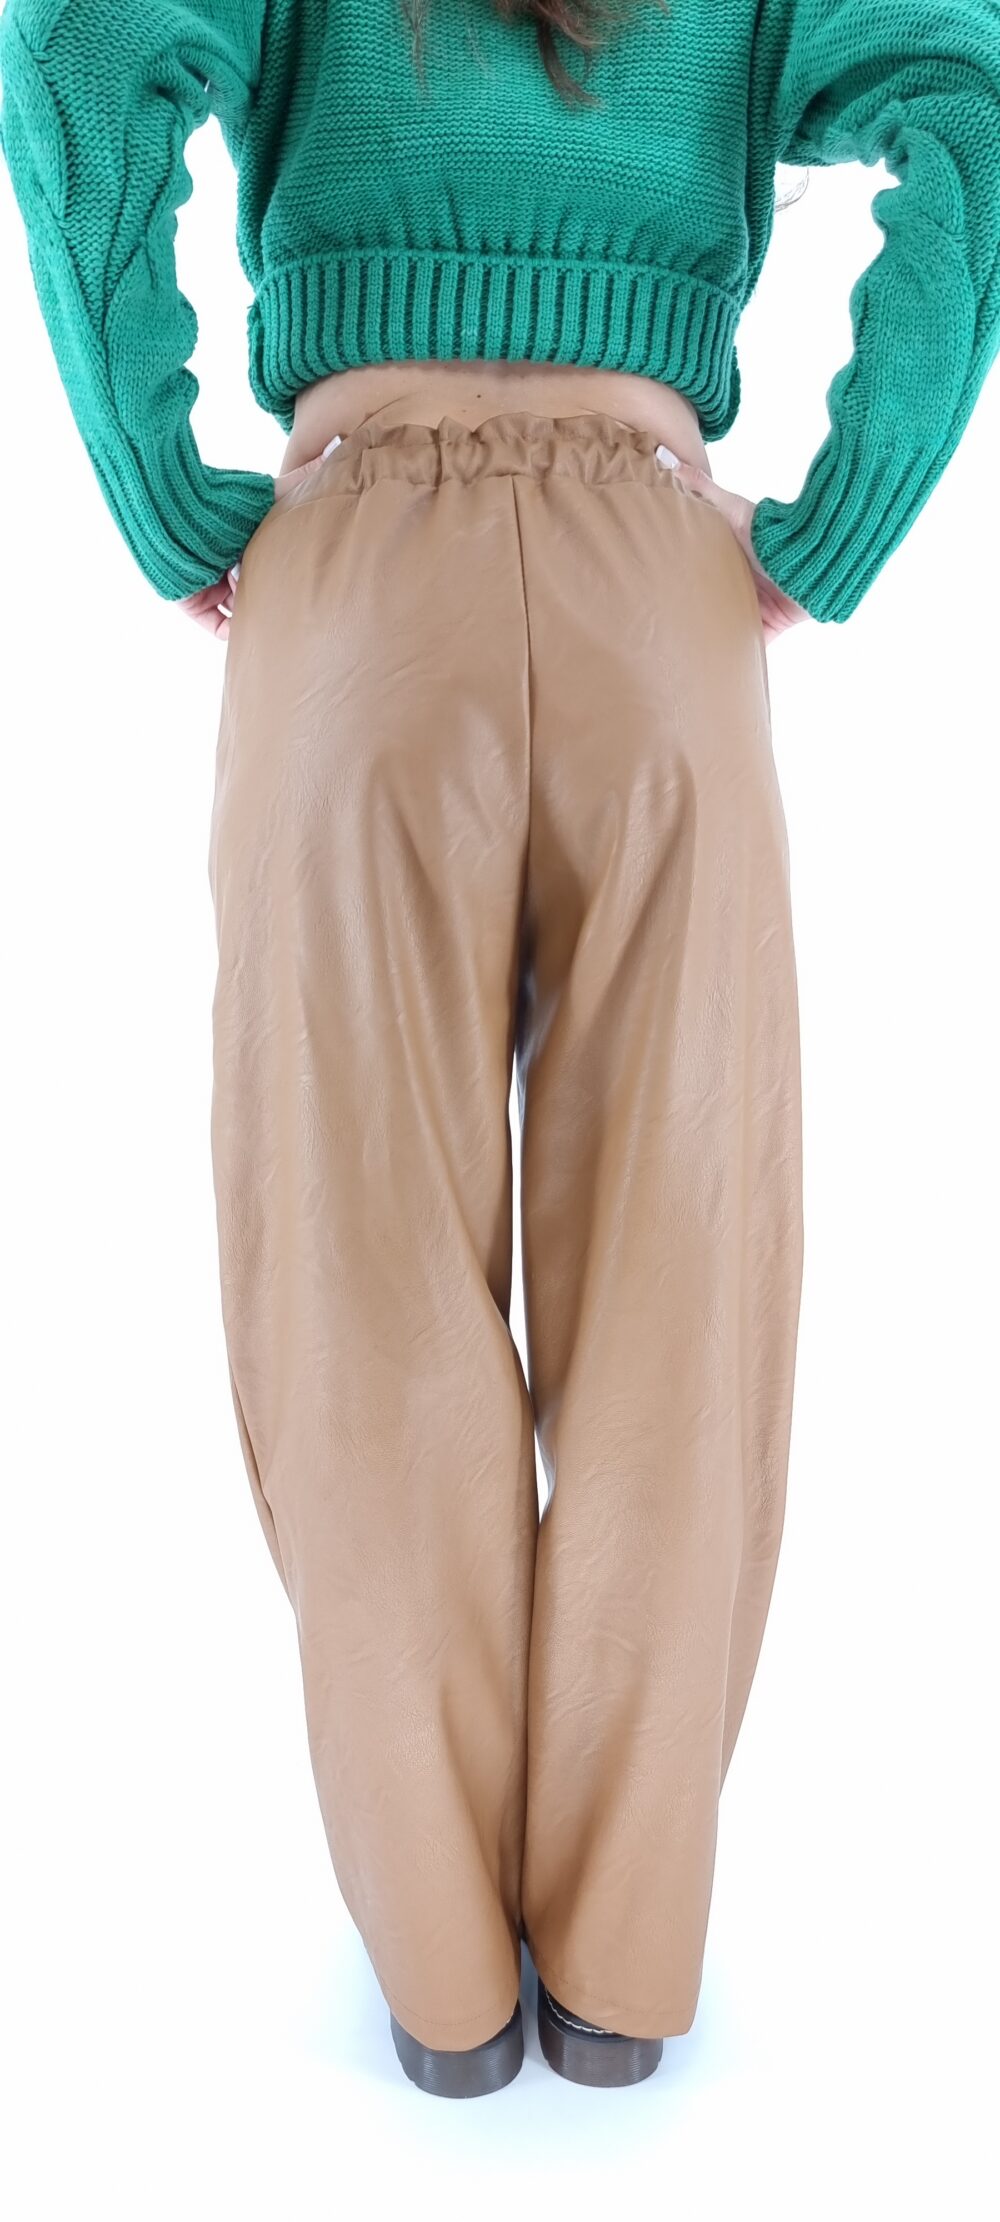 Leatherette pants with elastic in the middle and beige front pockets